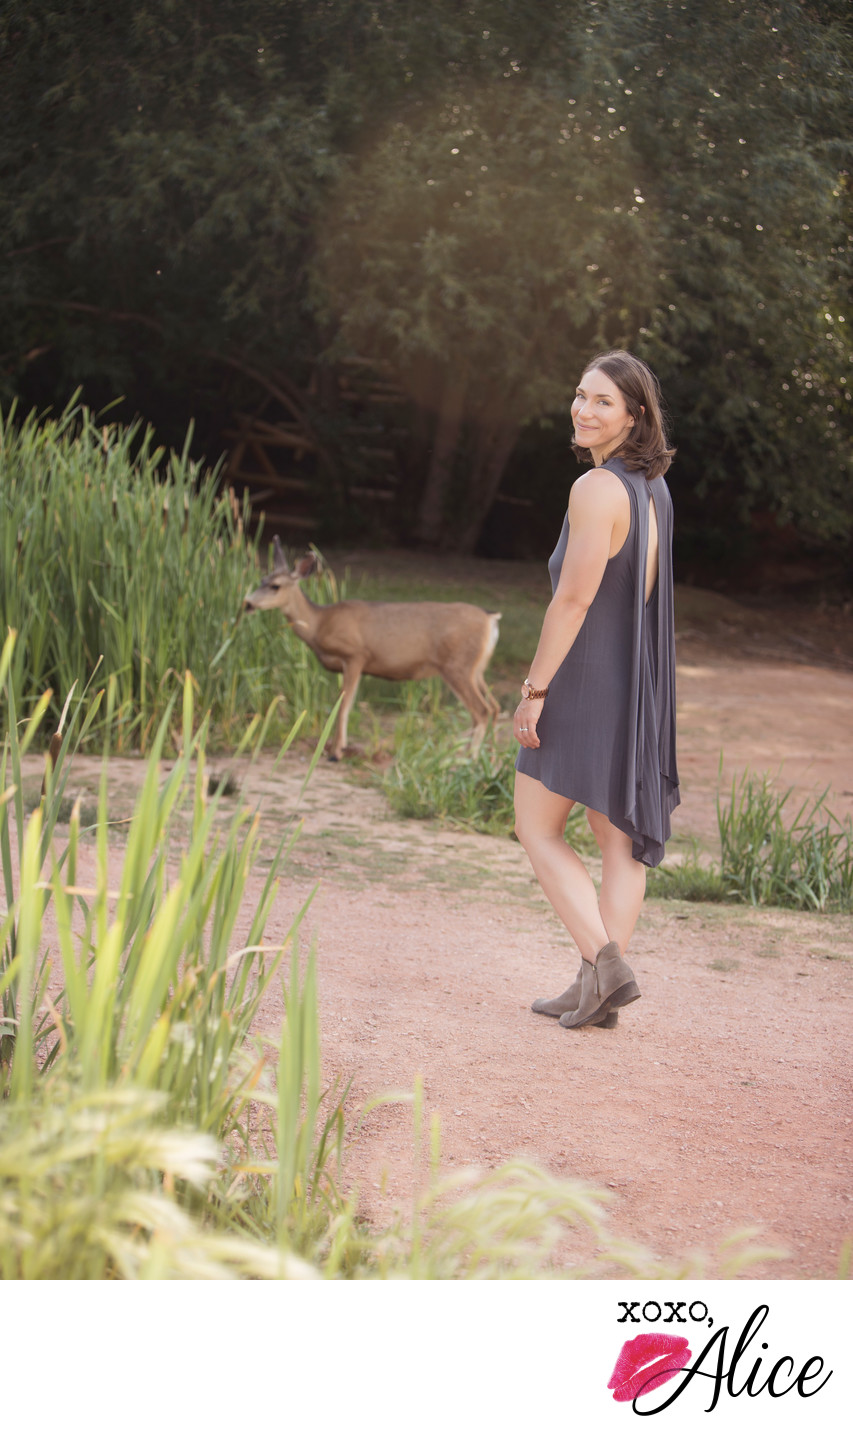 when a deer crashes your portrait session in colorado